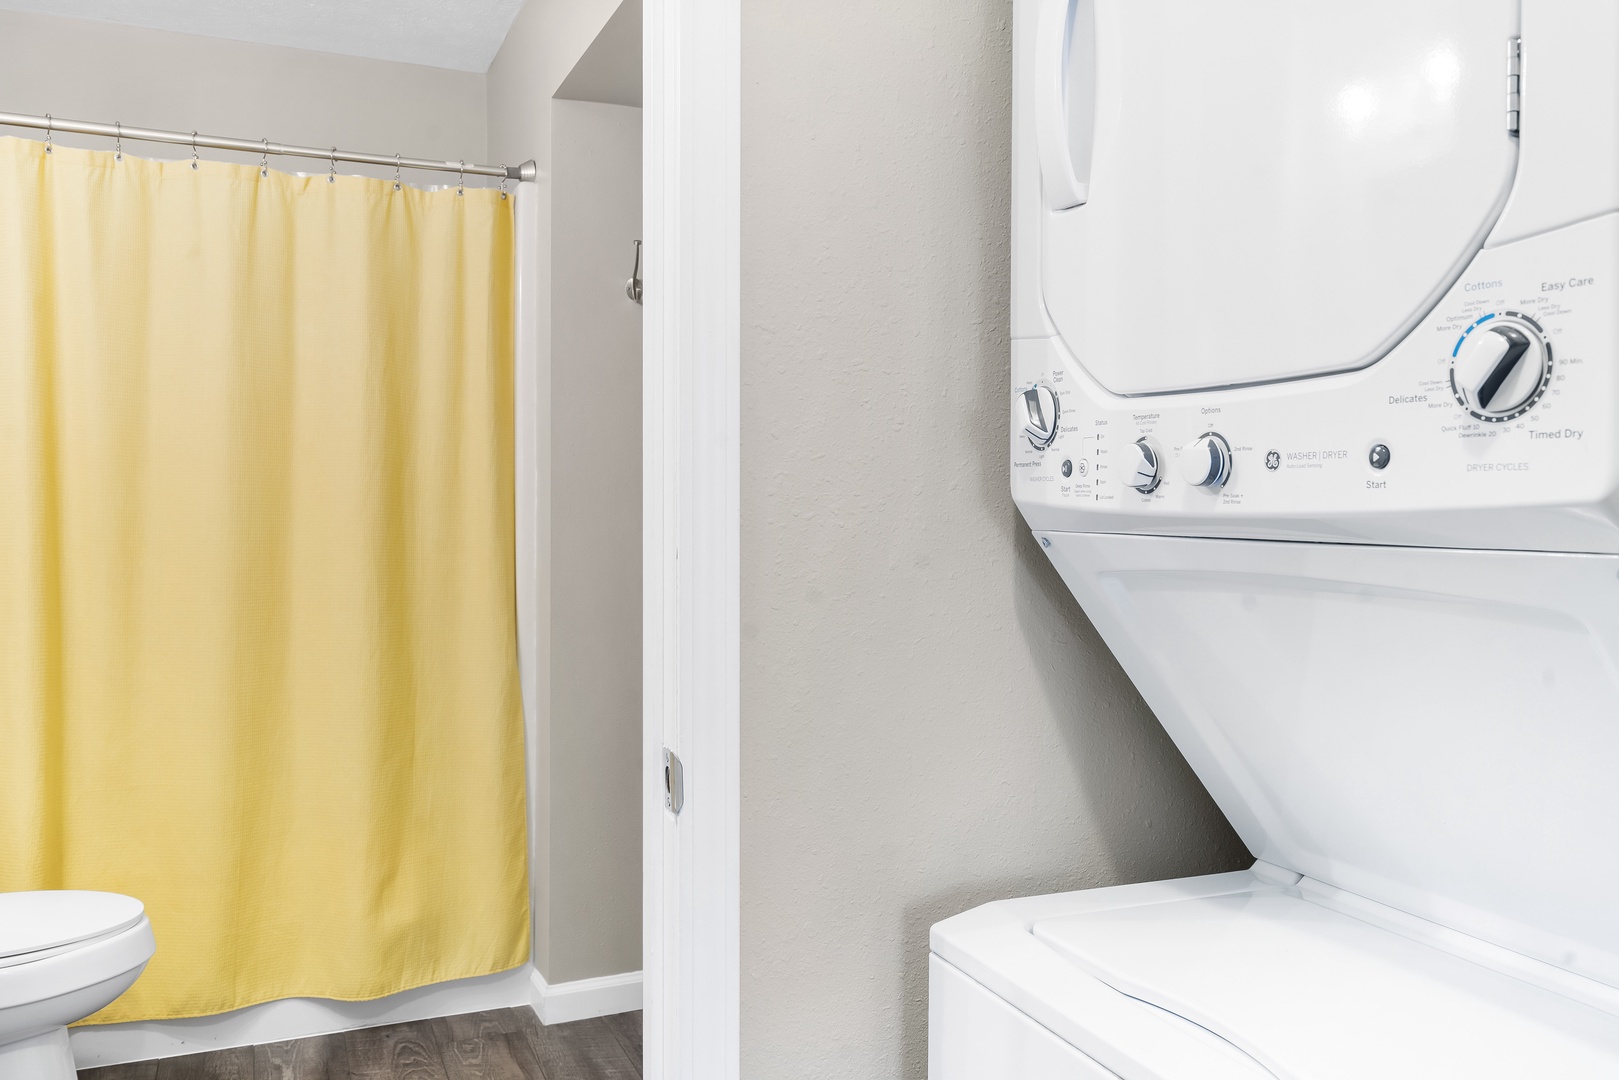 Private laundry is available for your stay, tucked away near the ensuite